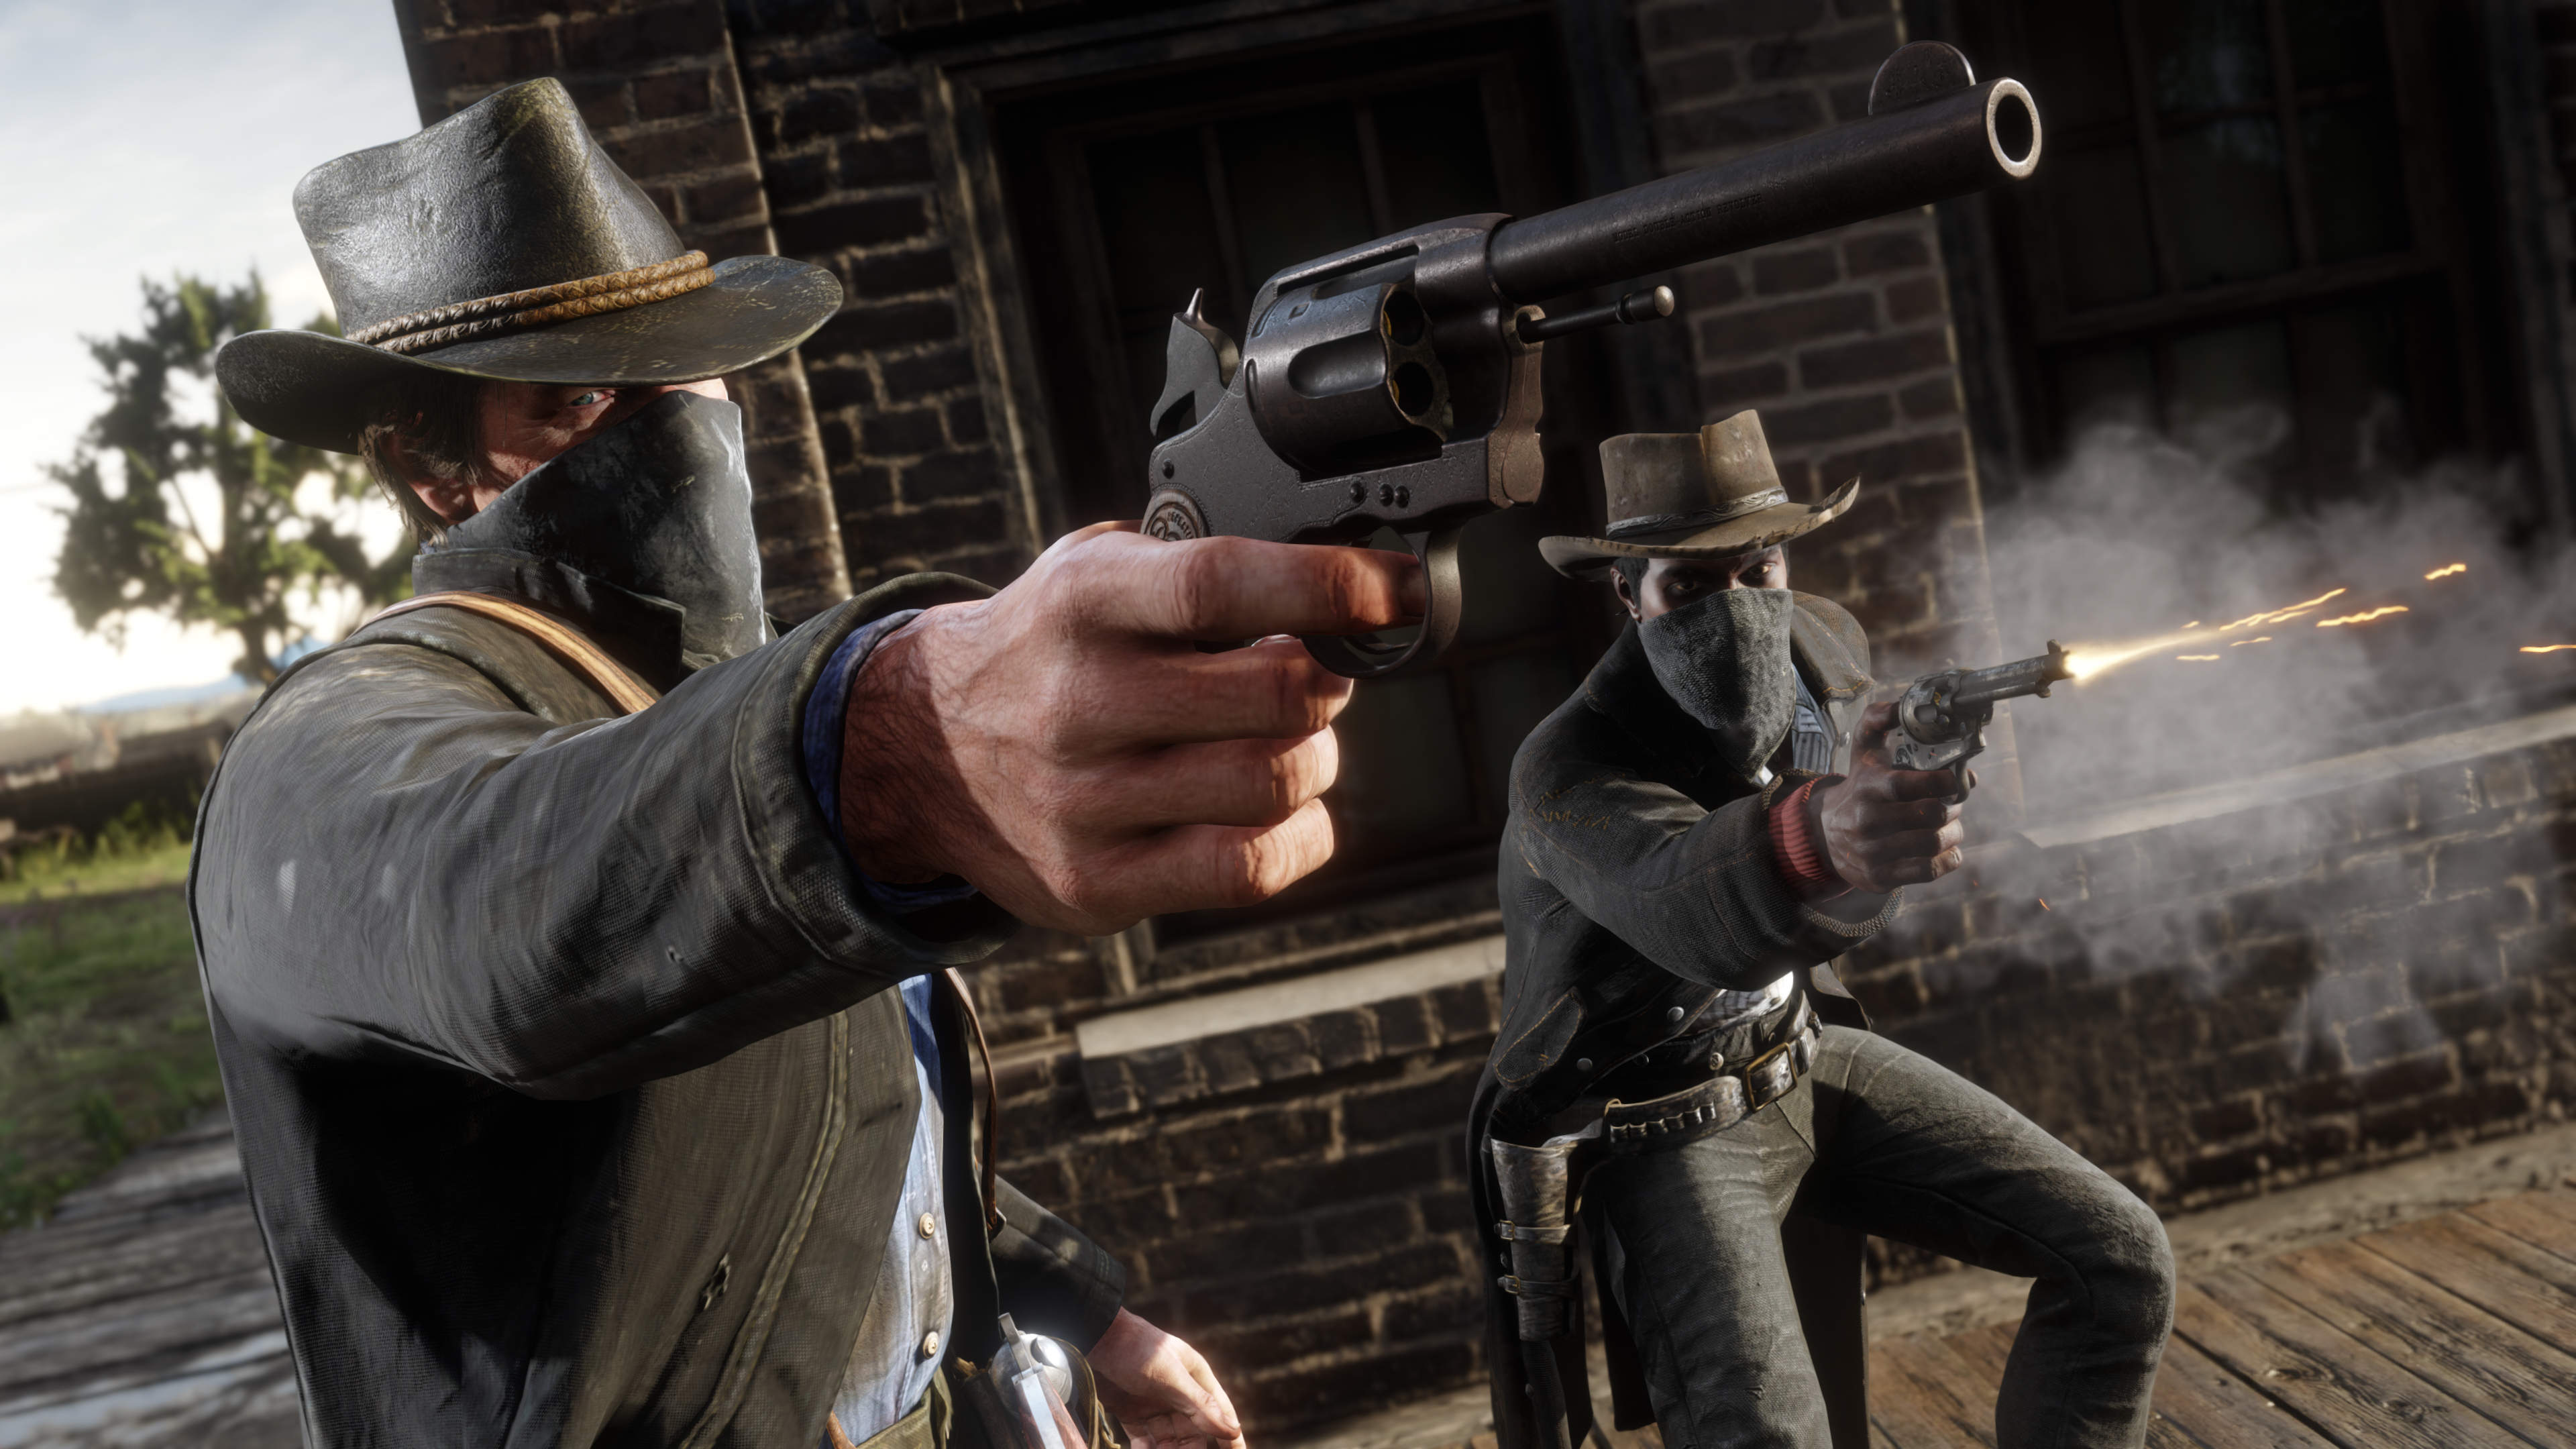 Red Dead Redemption 2 System Requirements - What Are the